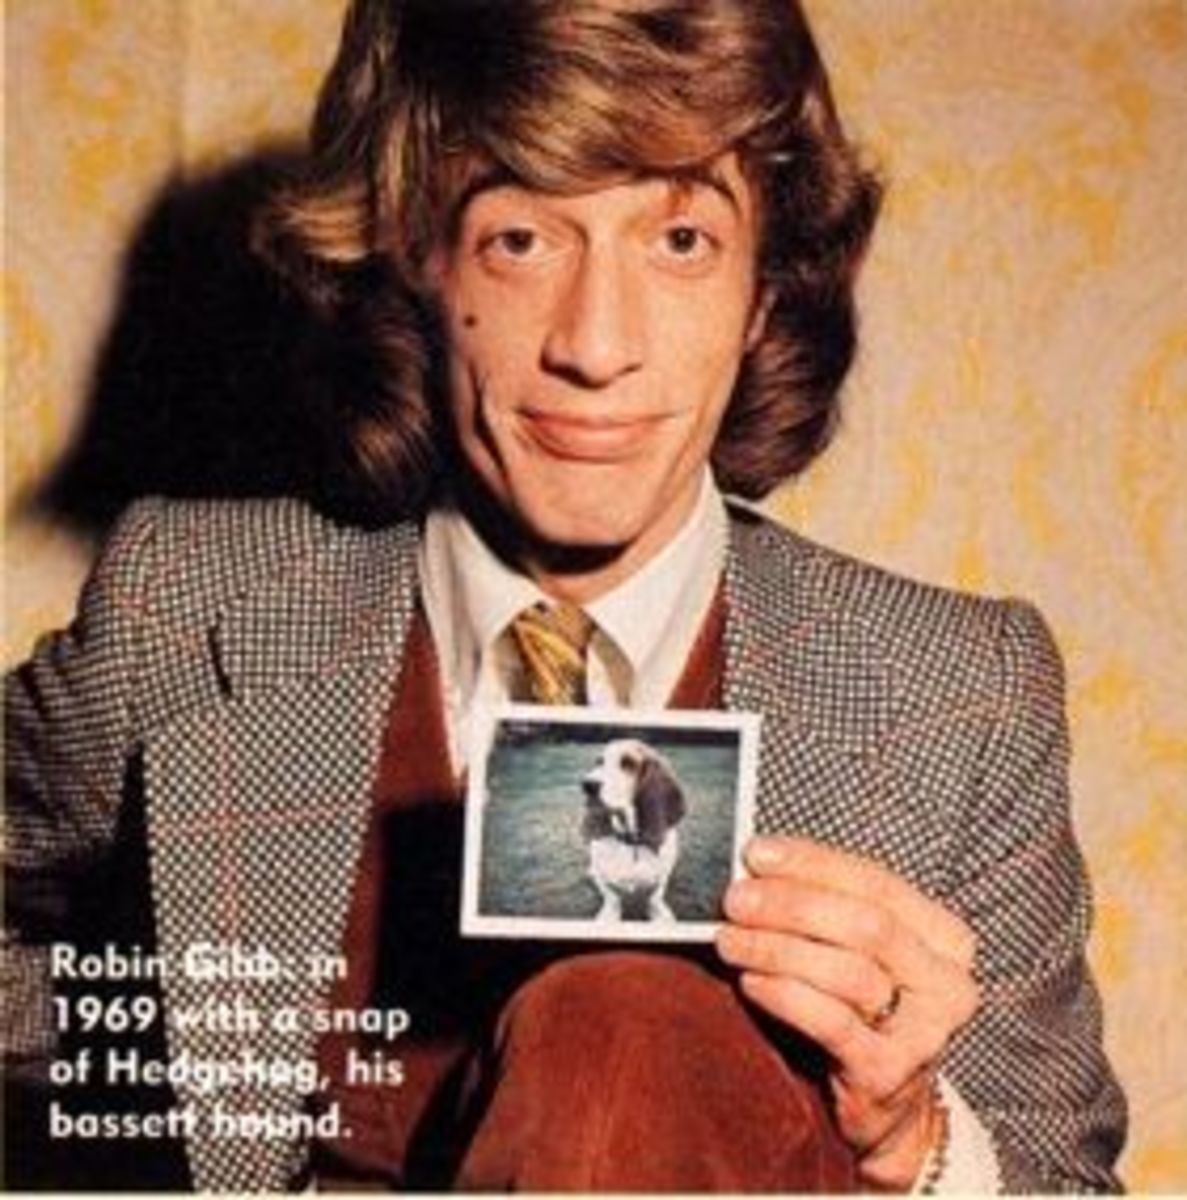 Mr R H Gibb with a picture of his Bassett Hound Hedgehog